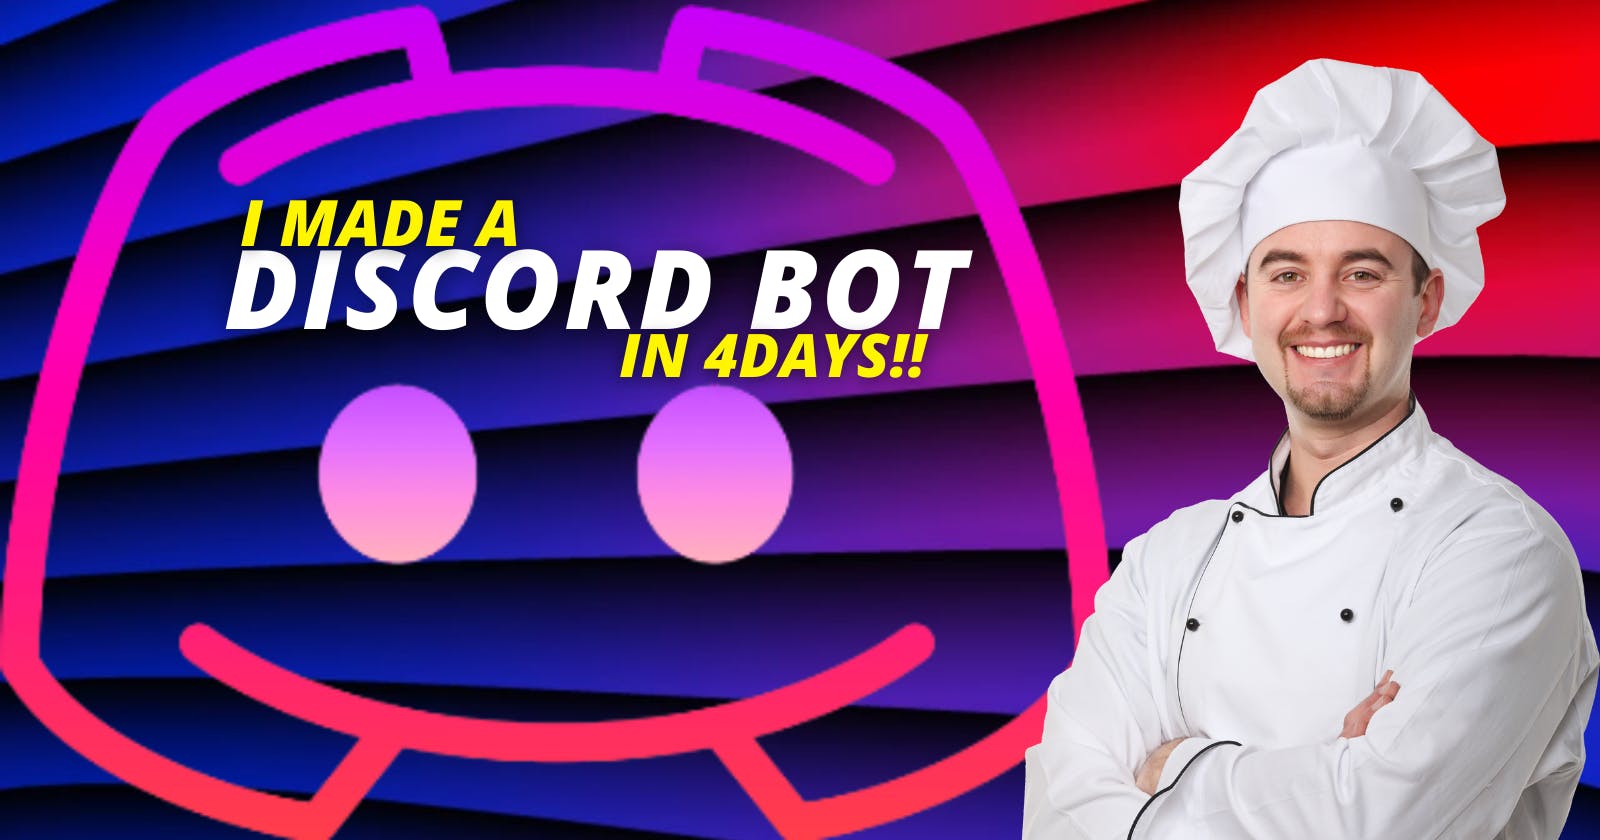 I made a Discord Bot in 4days!